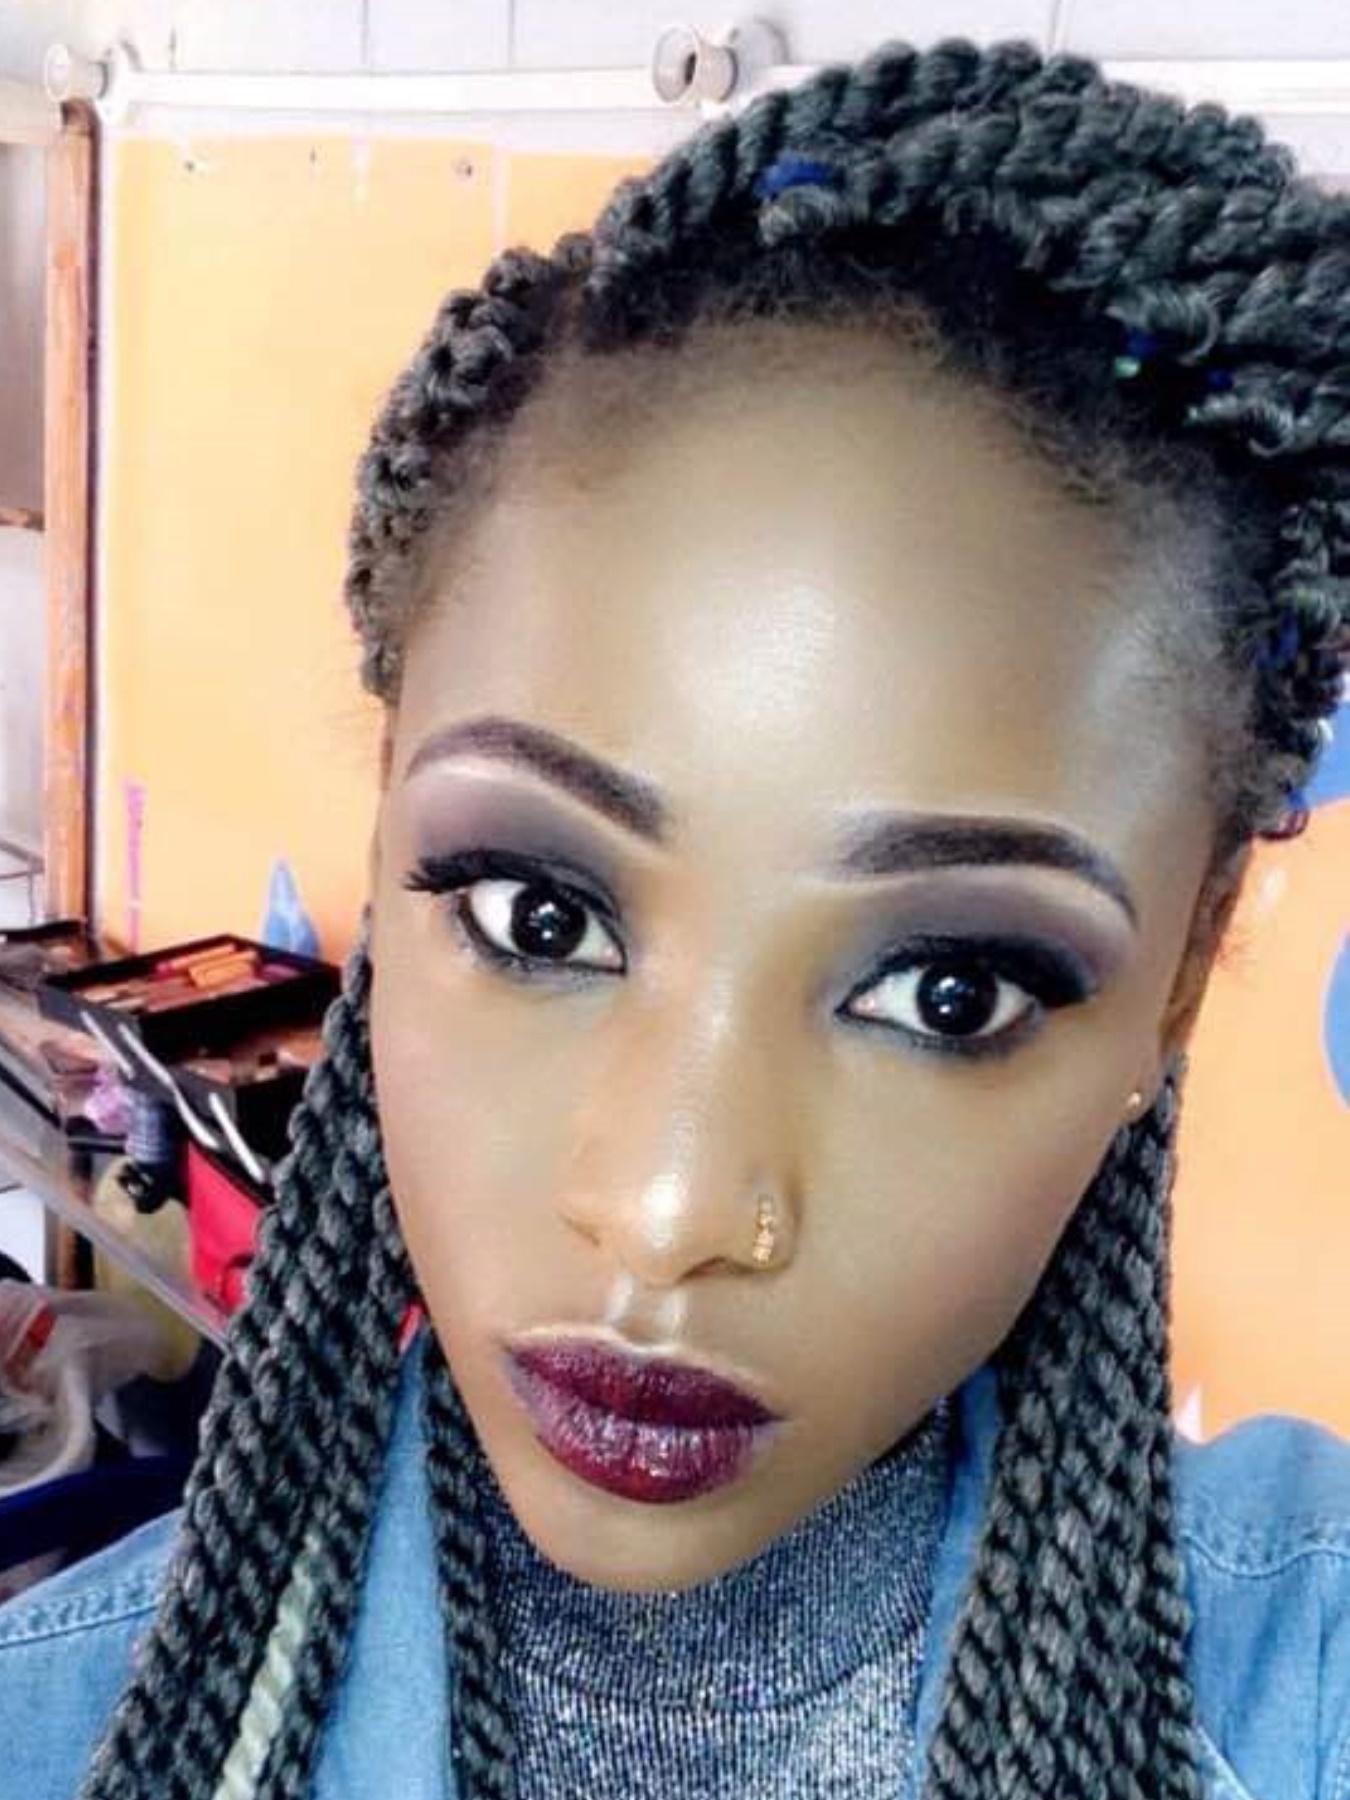 Slay queen Hikma Hussein dies one week after car accident